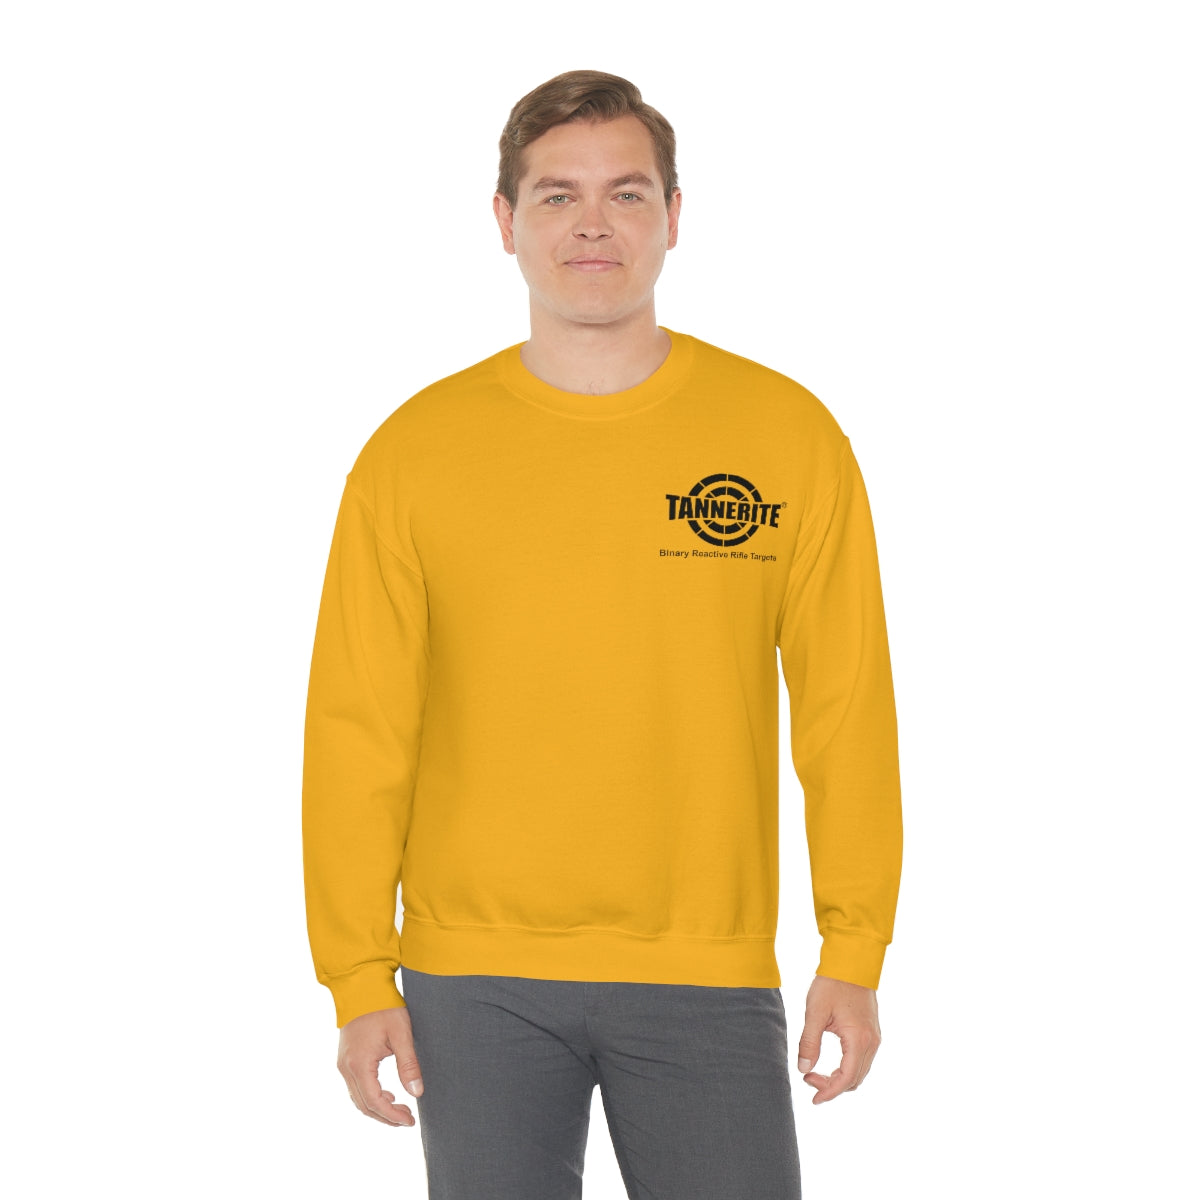 Tannerite Target FRONT and BACK - Sweatshirt